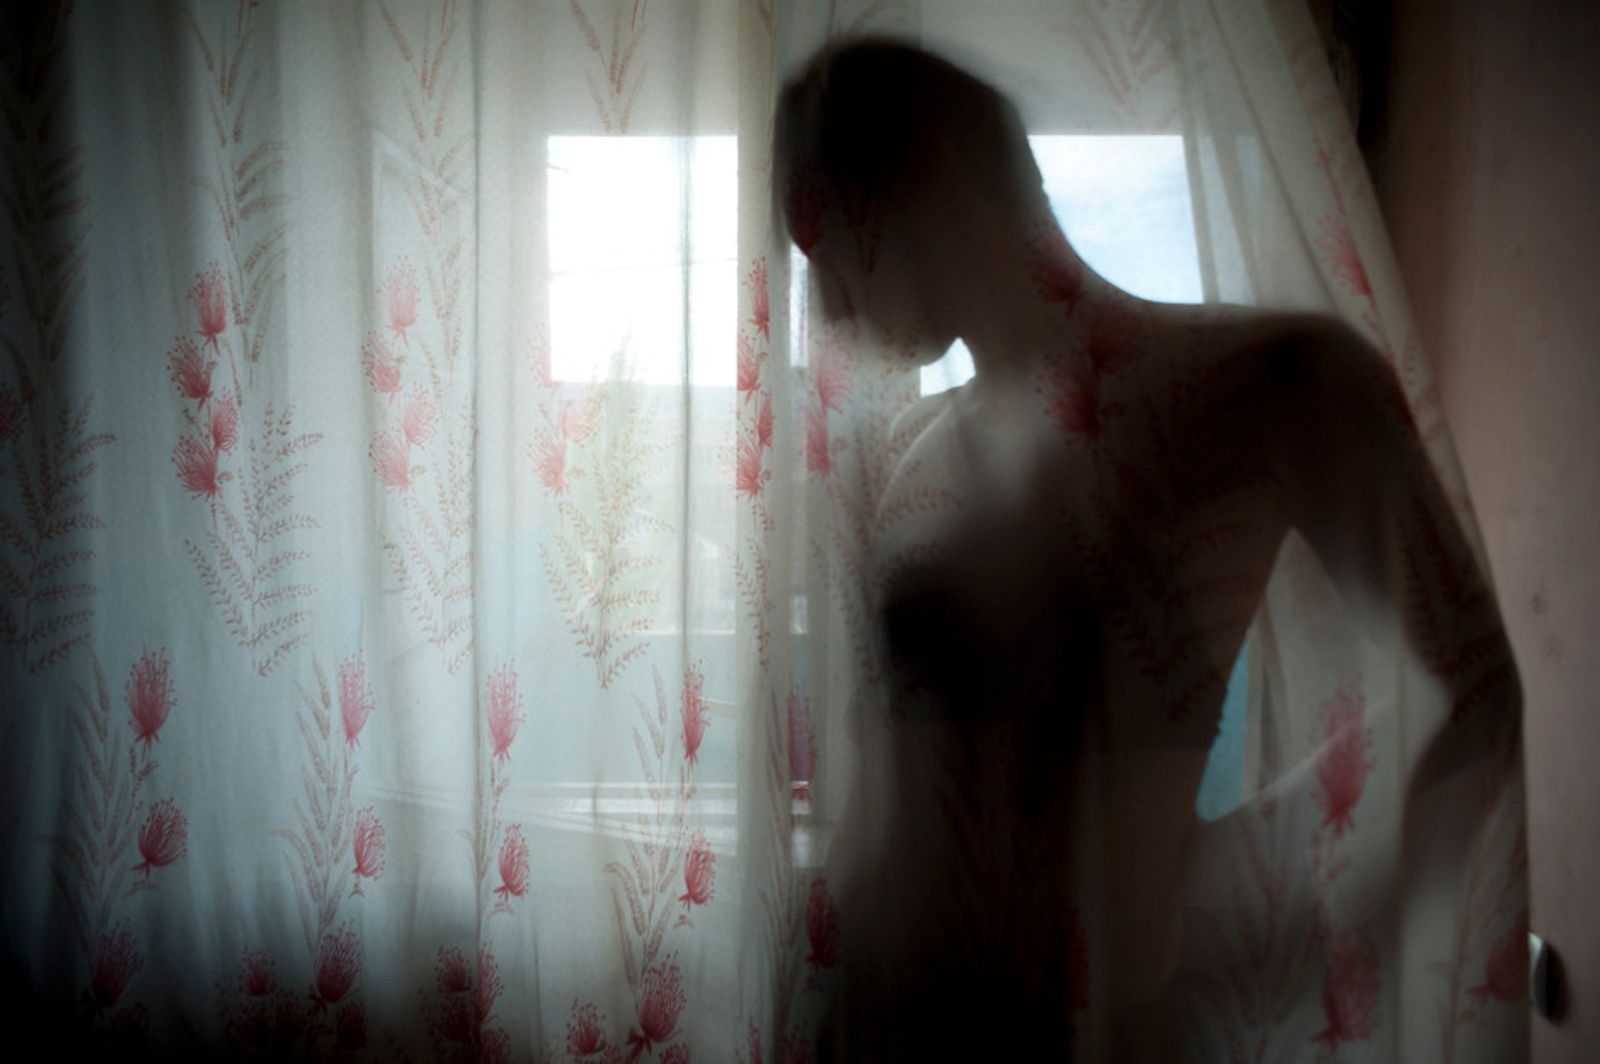 © Nazik Armenakian - Image from the Transgenders photography project